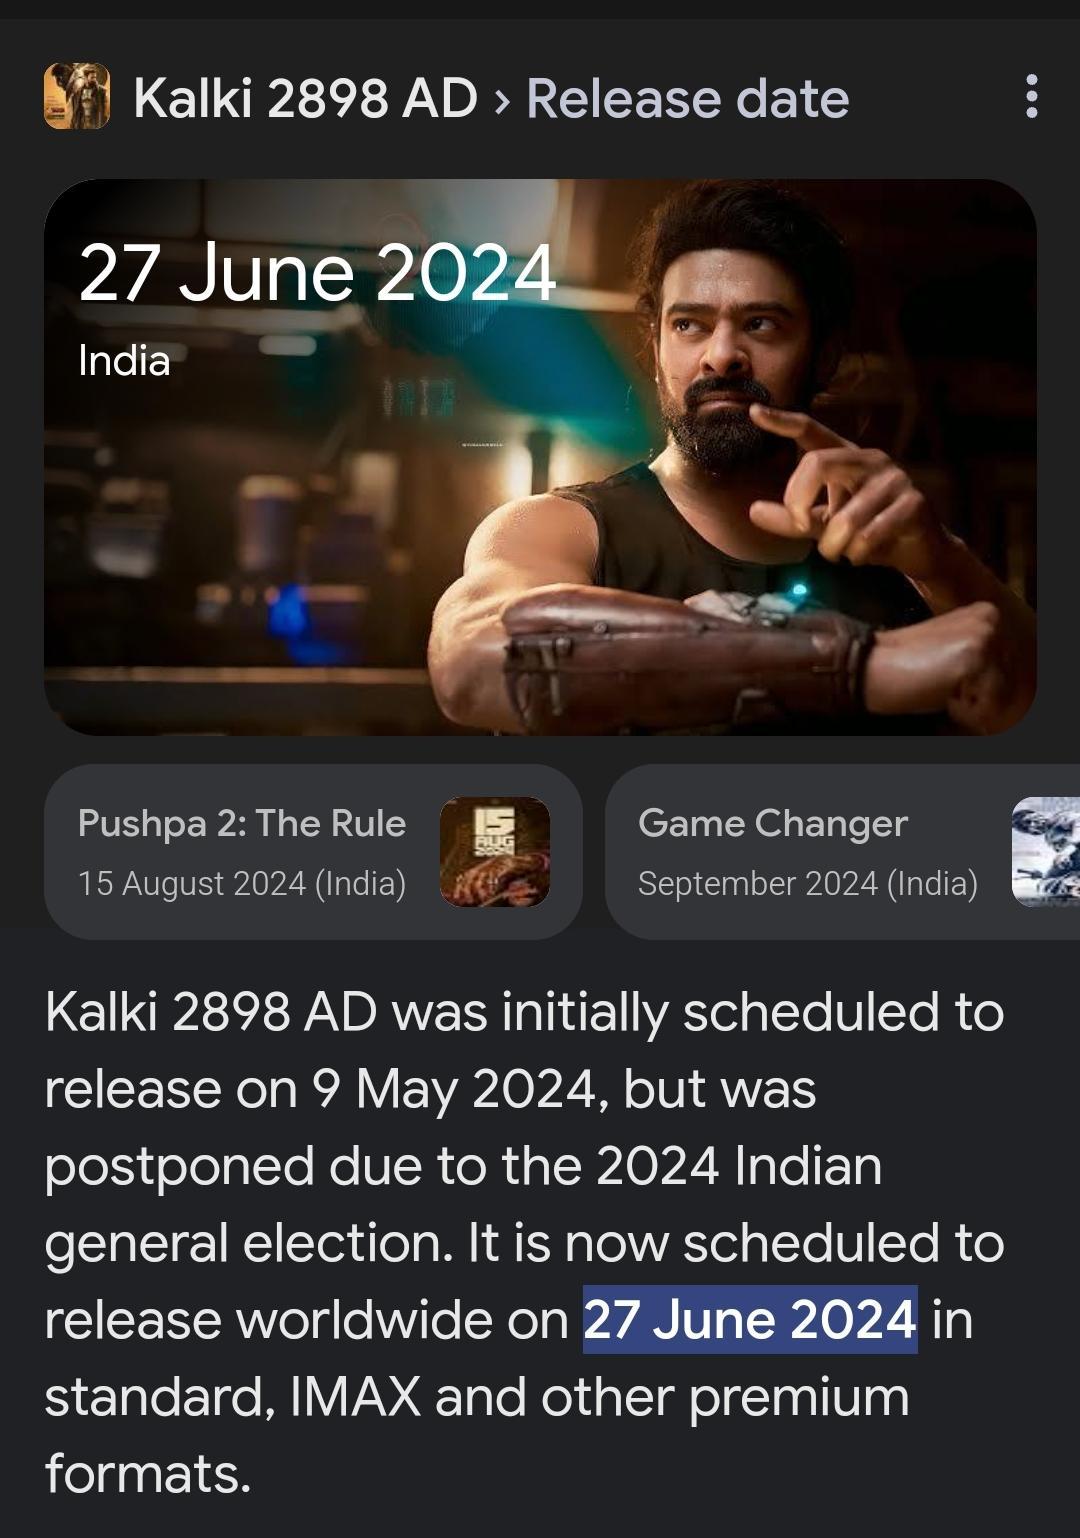 When will Kalki 2898 AD be Released